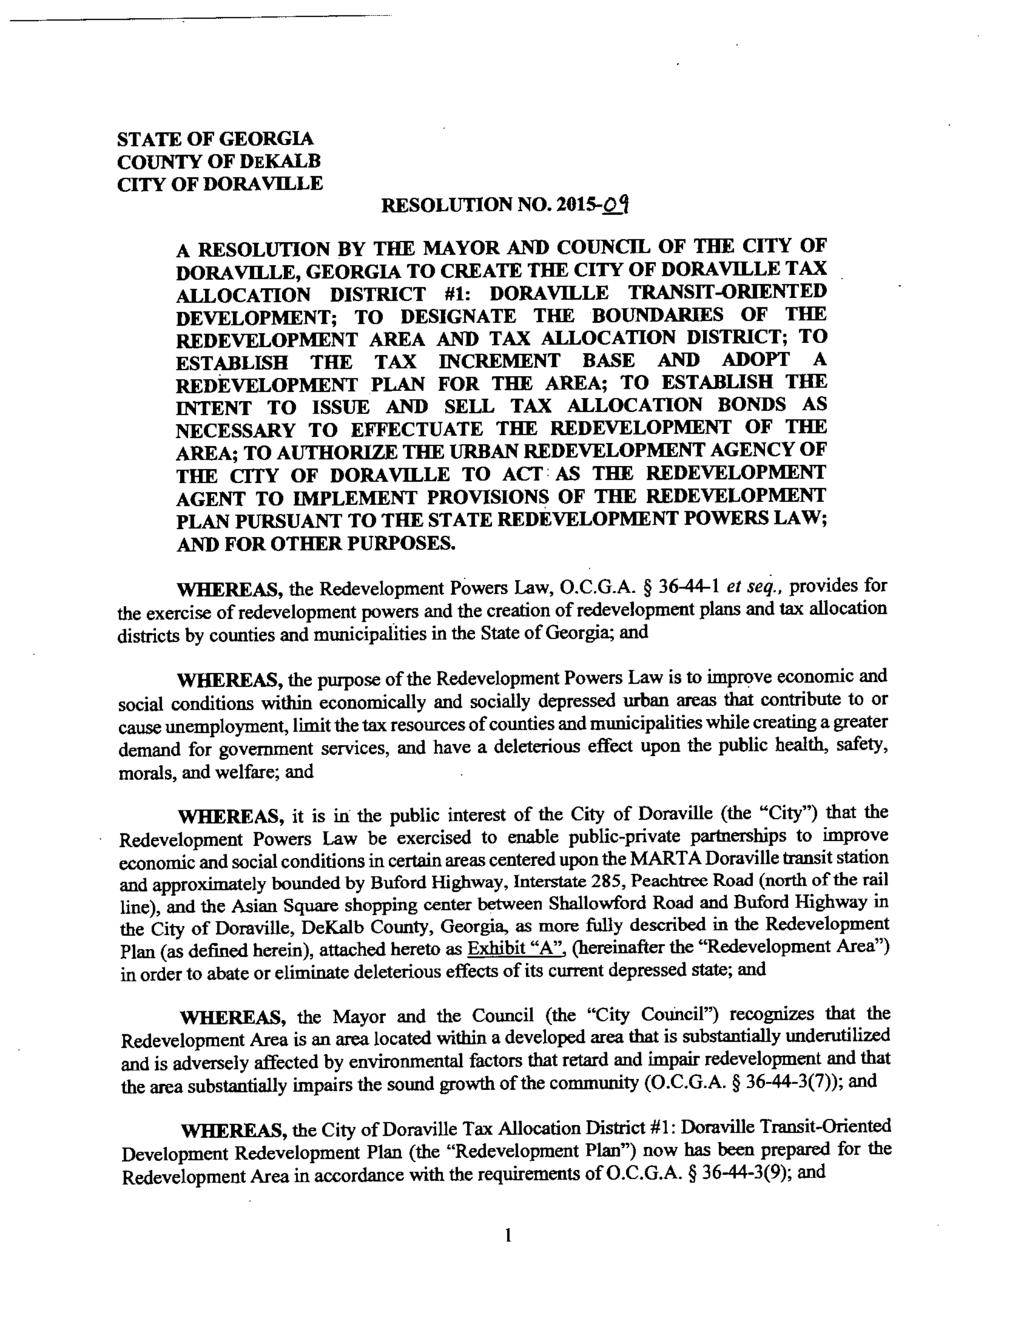 STATE OF GEORGIA COUNTY OF DEKALB CITY OF DORAVILLE RESOLUTION NO.